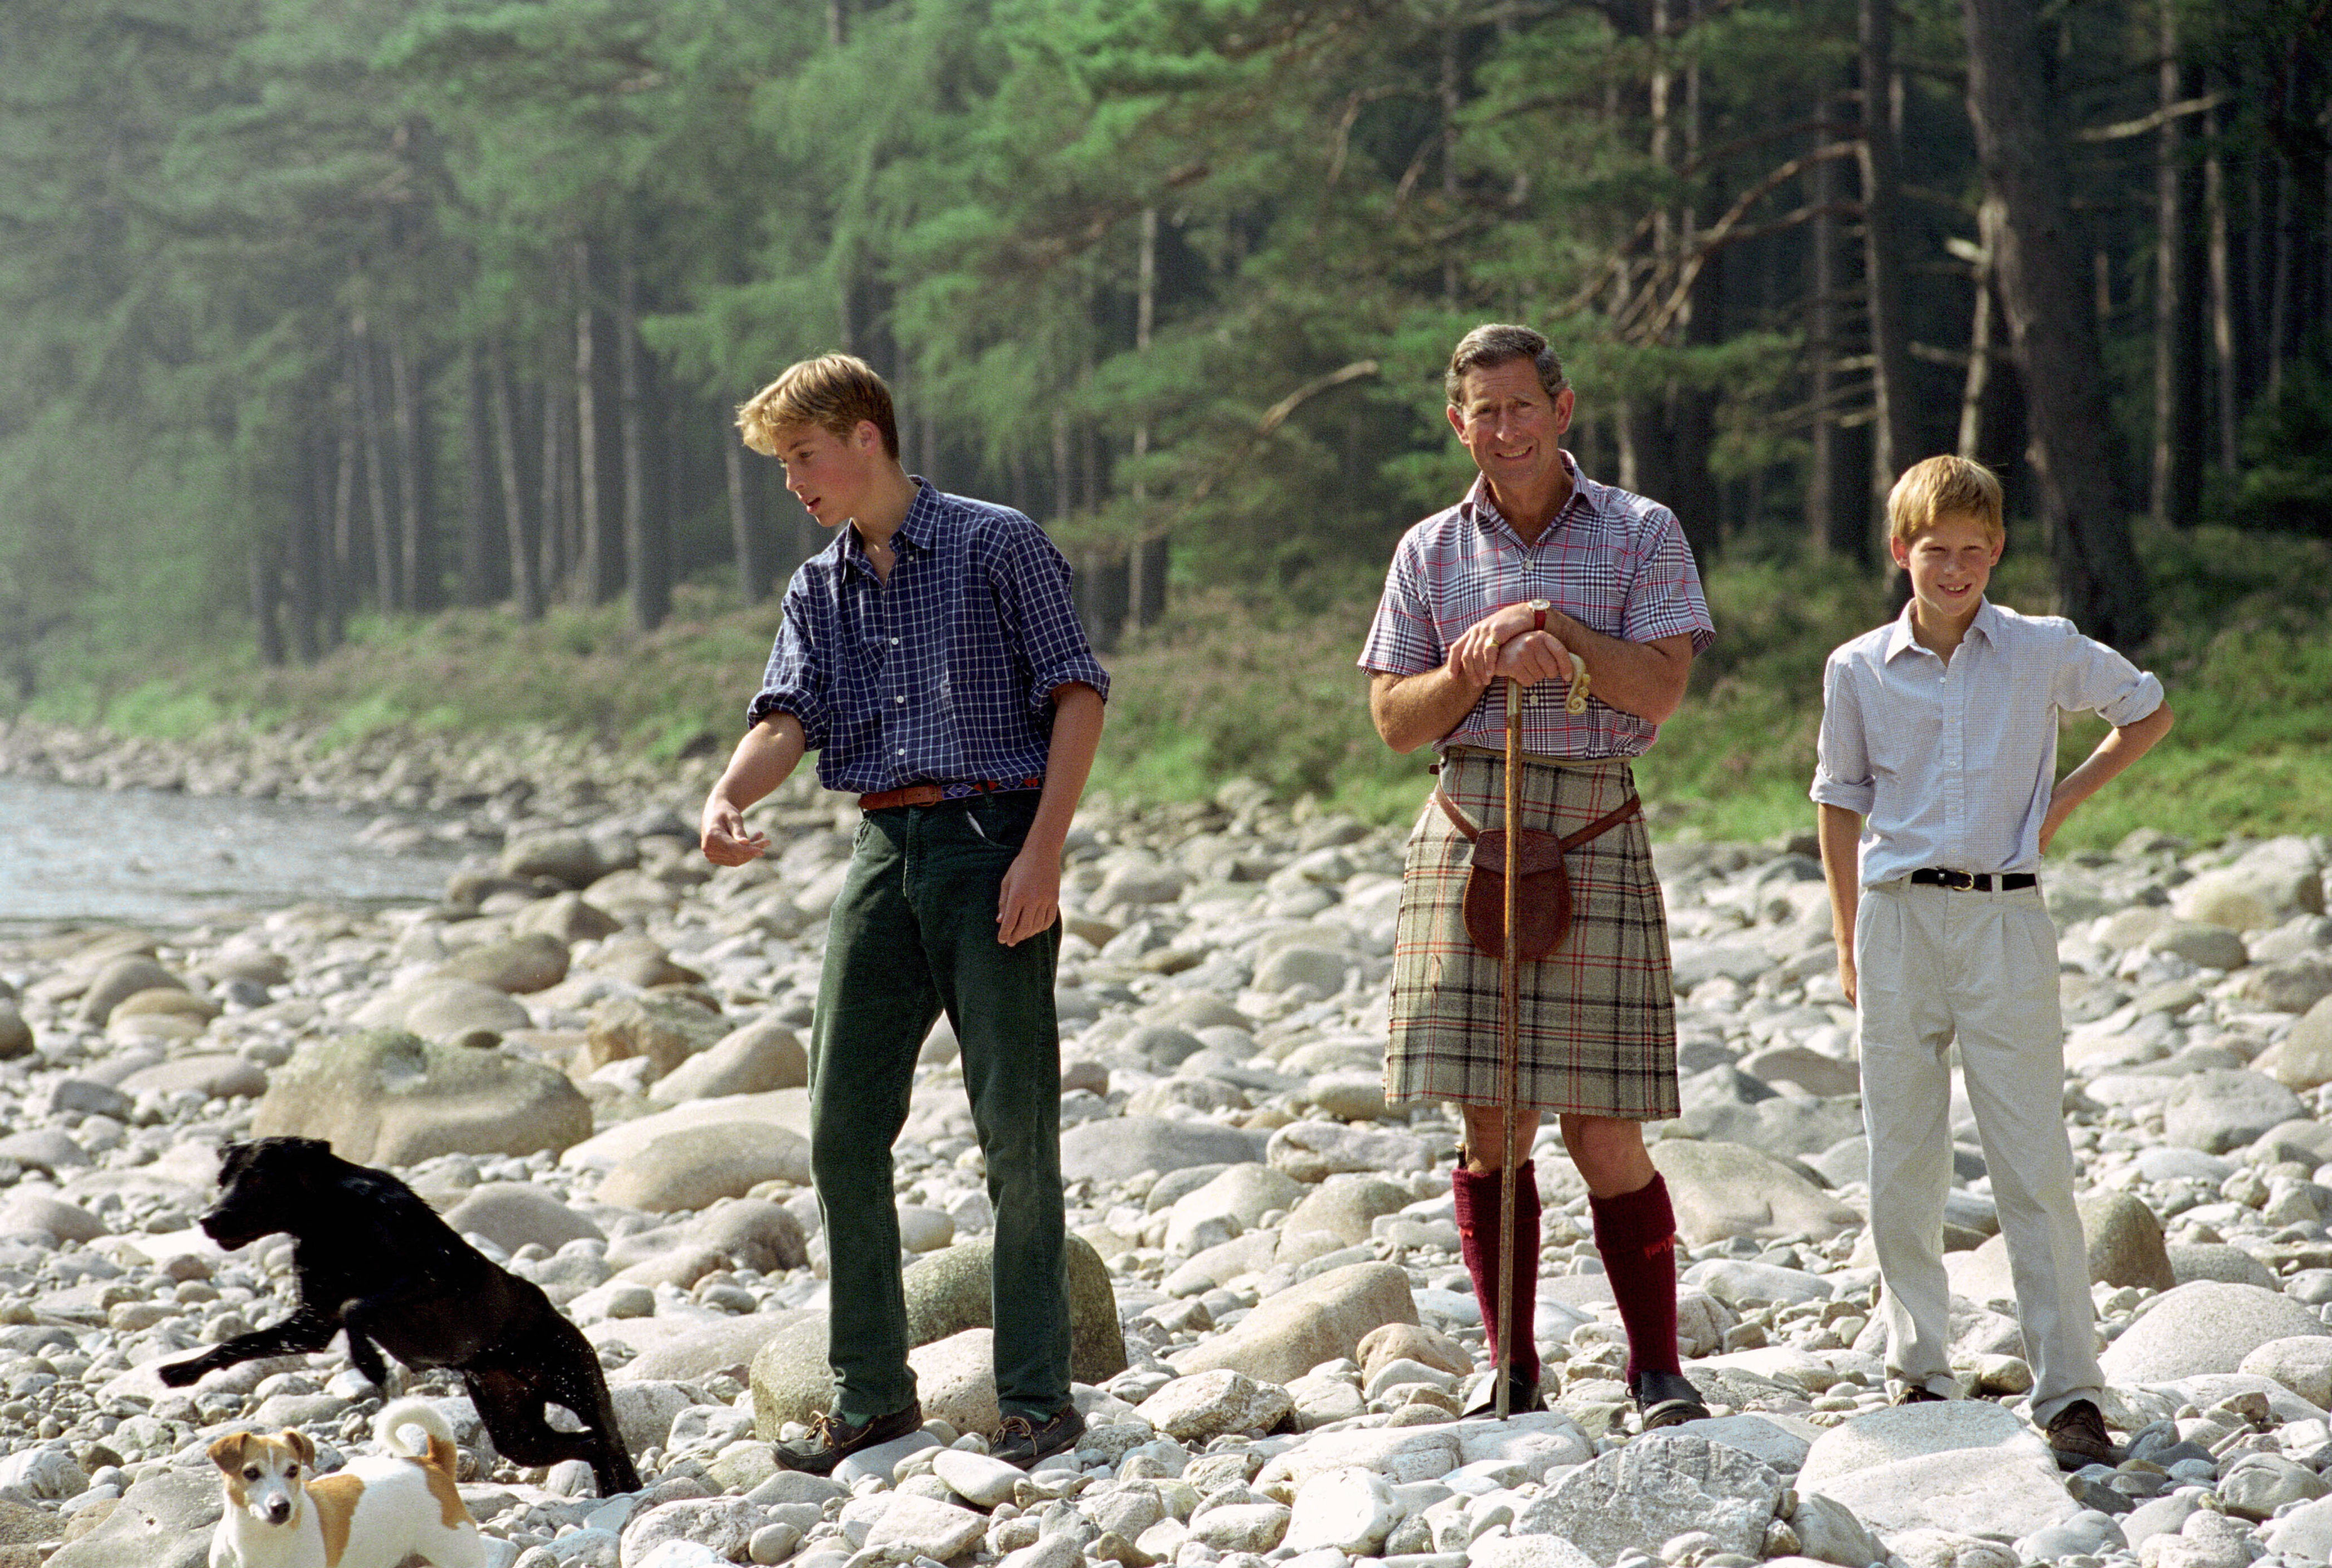 <p>A kilt- and sporran-clad Prince Charles, who carried a shepherd's crook walking stick, visited Polvier by the River Dee on the queen's Balmoral estate in Scotland with <a href="https://www.wonderwall.com/celebrity/profiles/overview/prince-william-482.article">Prince William</a> and <a href="https://www.wonderwall.com/celebrity/profiles/overview/prince-harry-481.article">Prince Harry</a> and their dogs, black Labrador retriever Widgeon and Jack Russell terrier Tigga, on Aug. 10, 1997.</p>